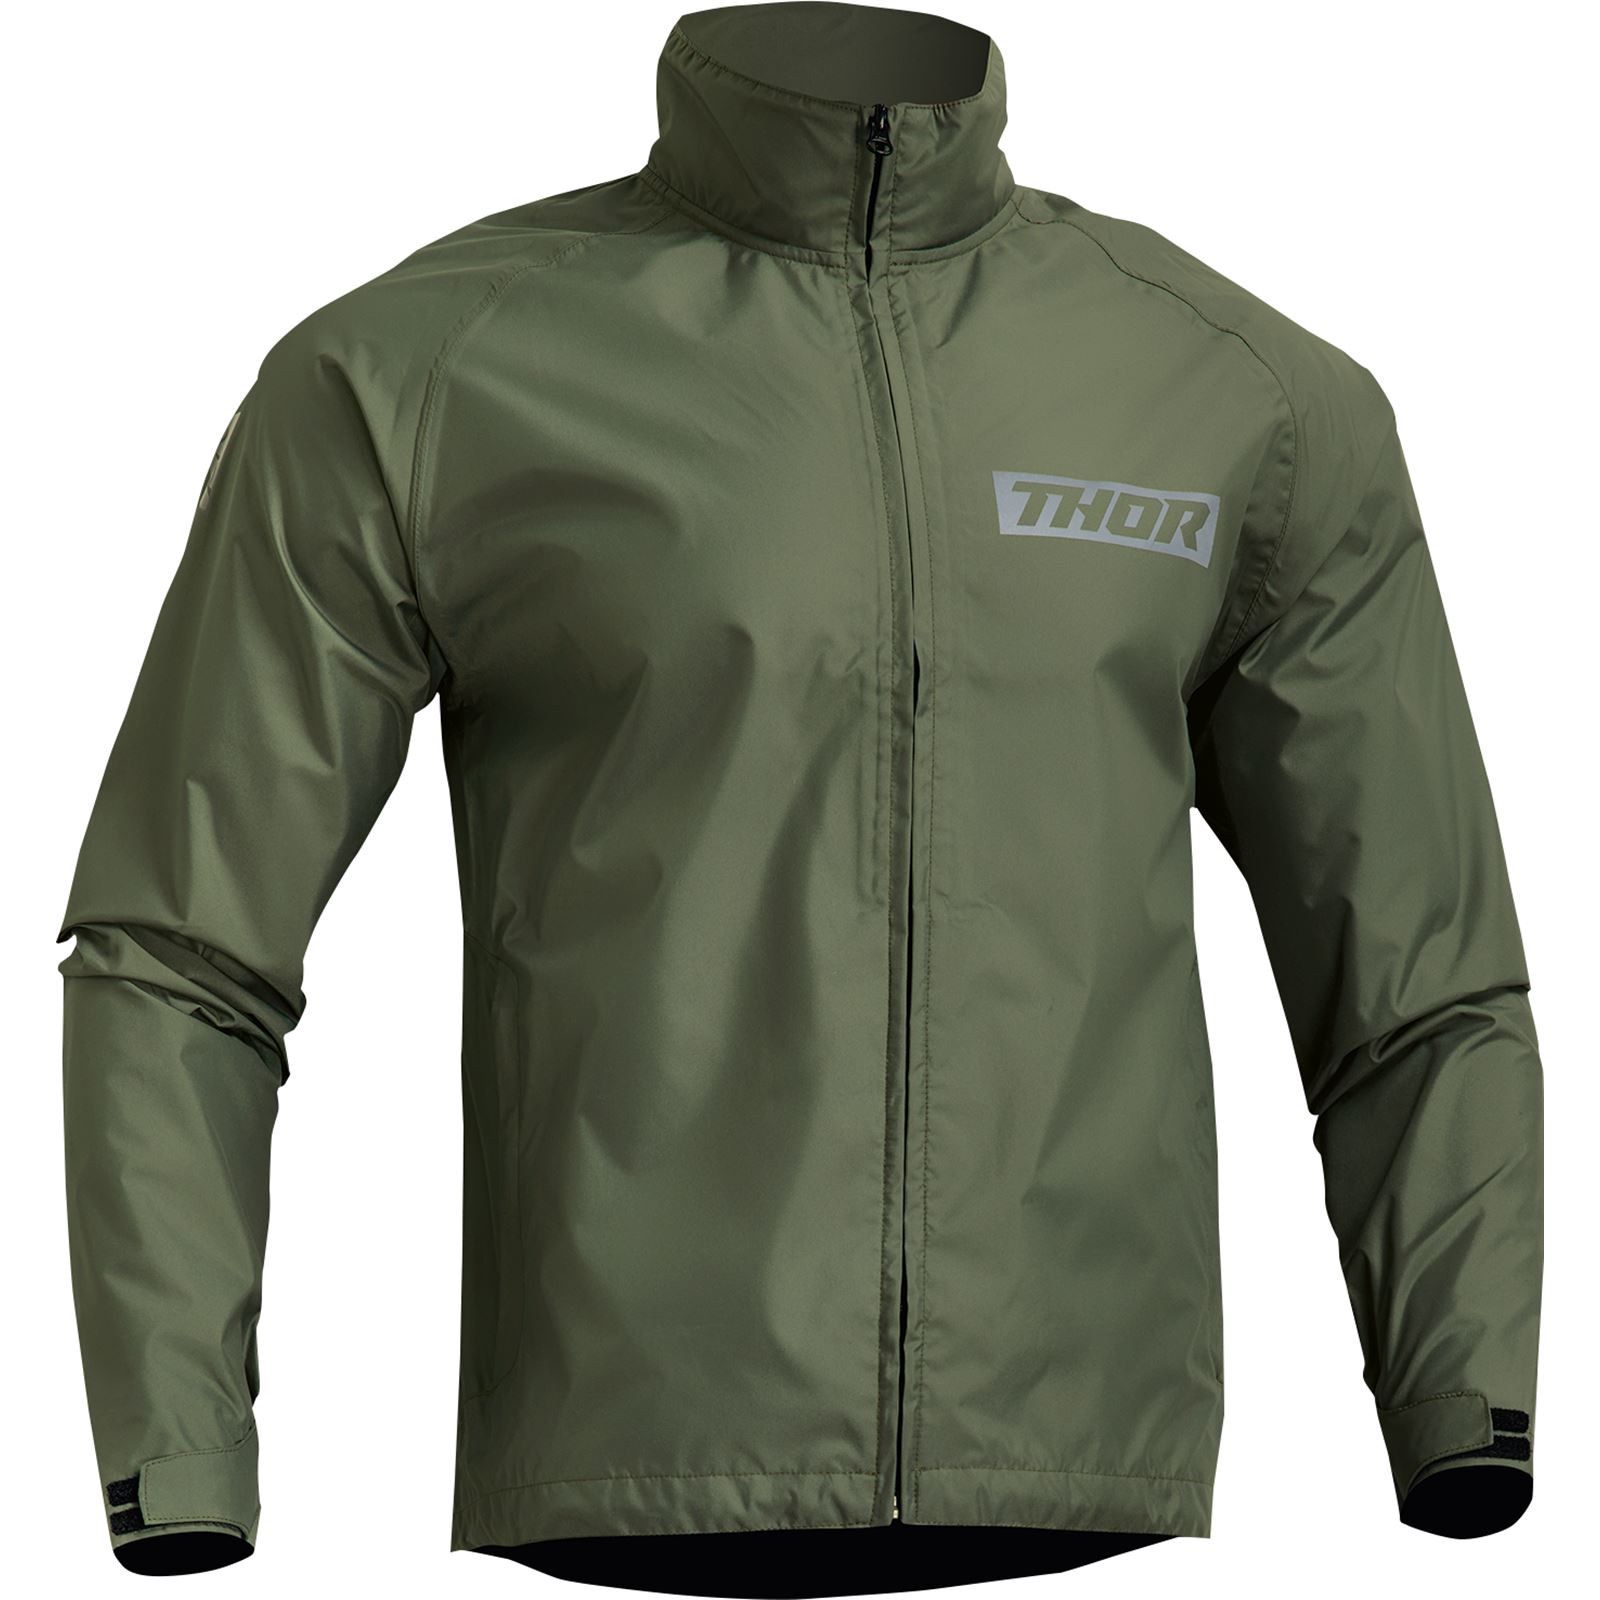 Thor Pack Jacket - Army Green - 3XL